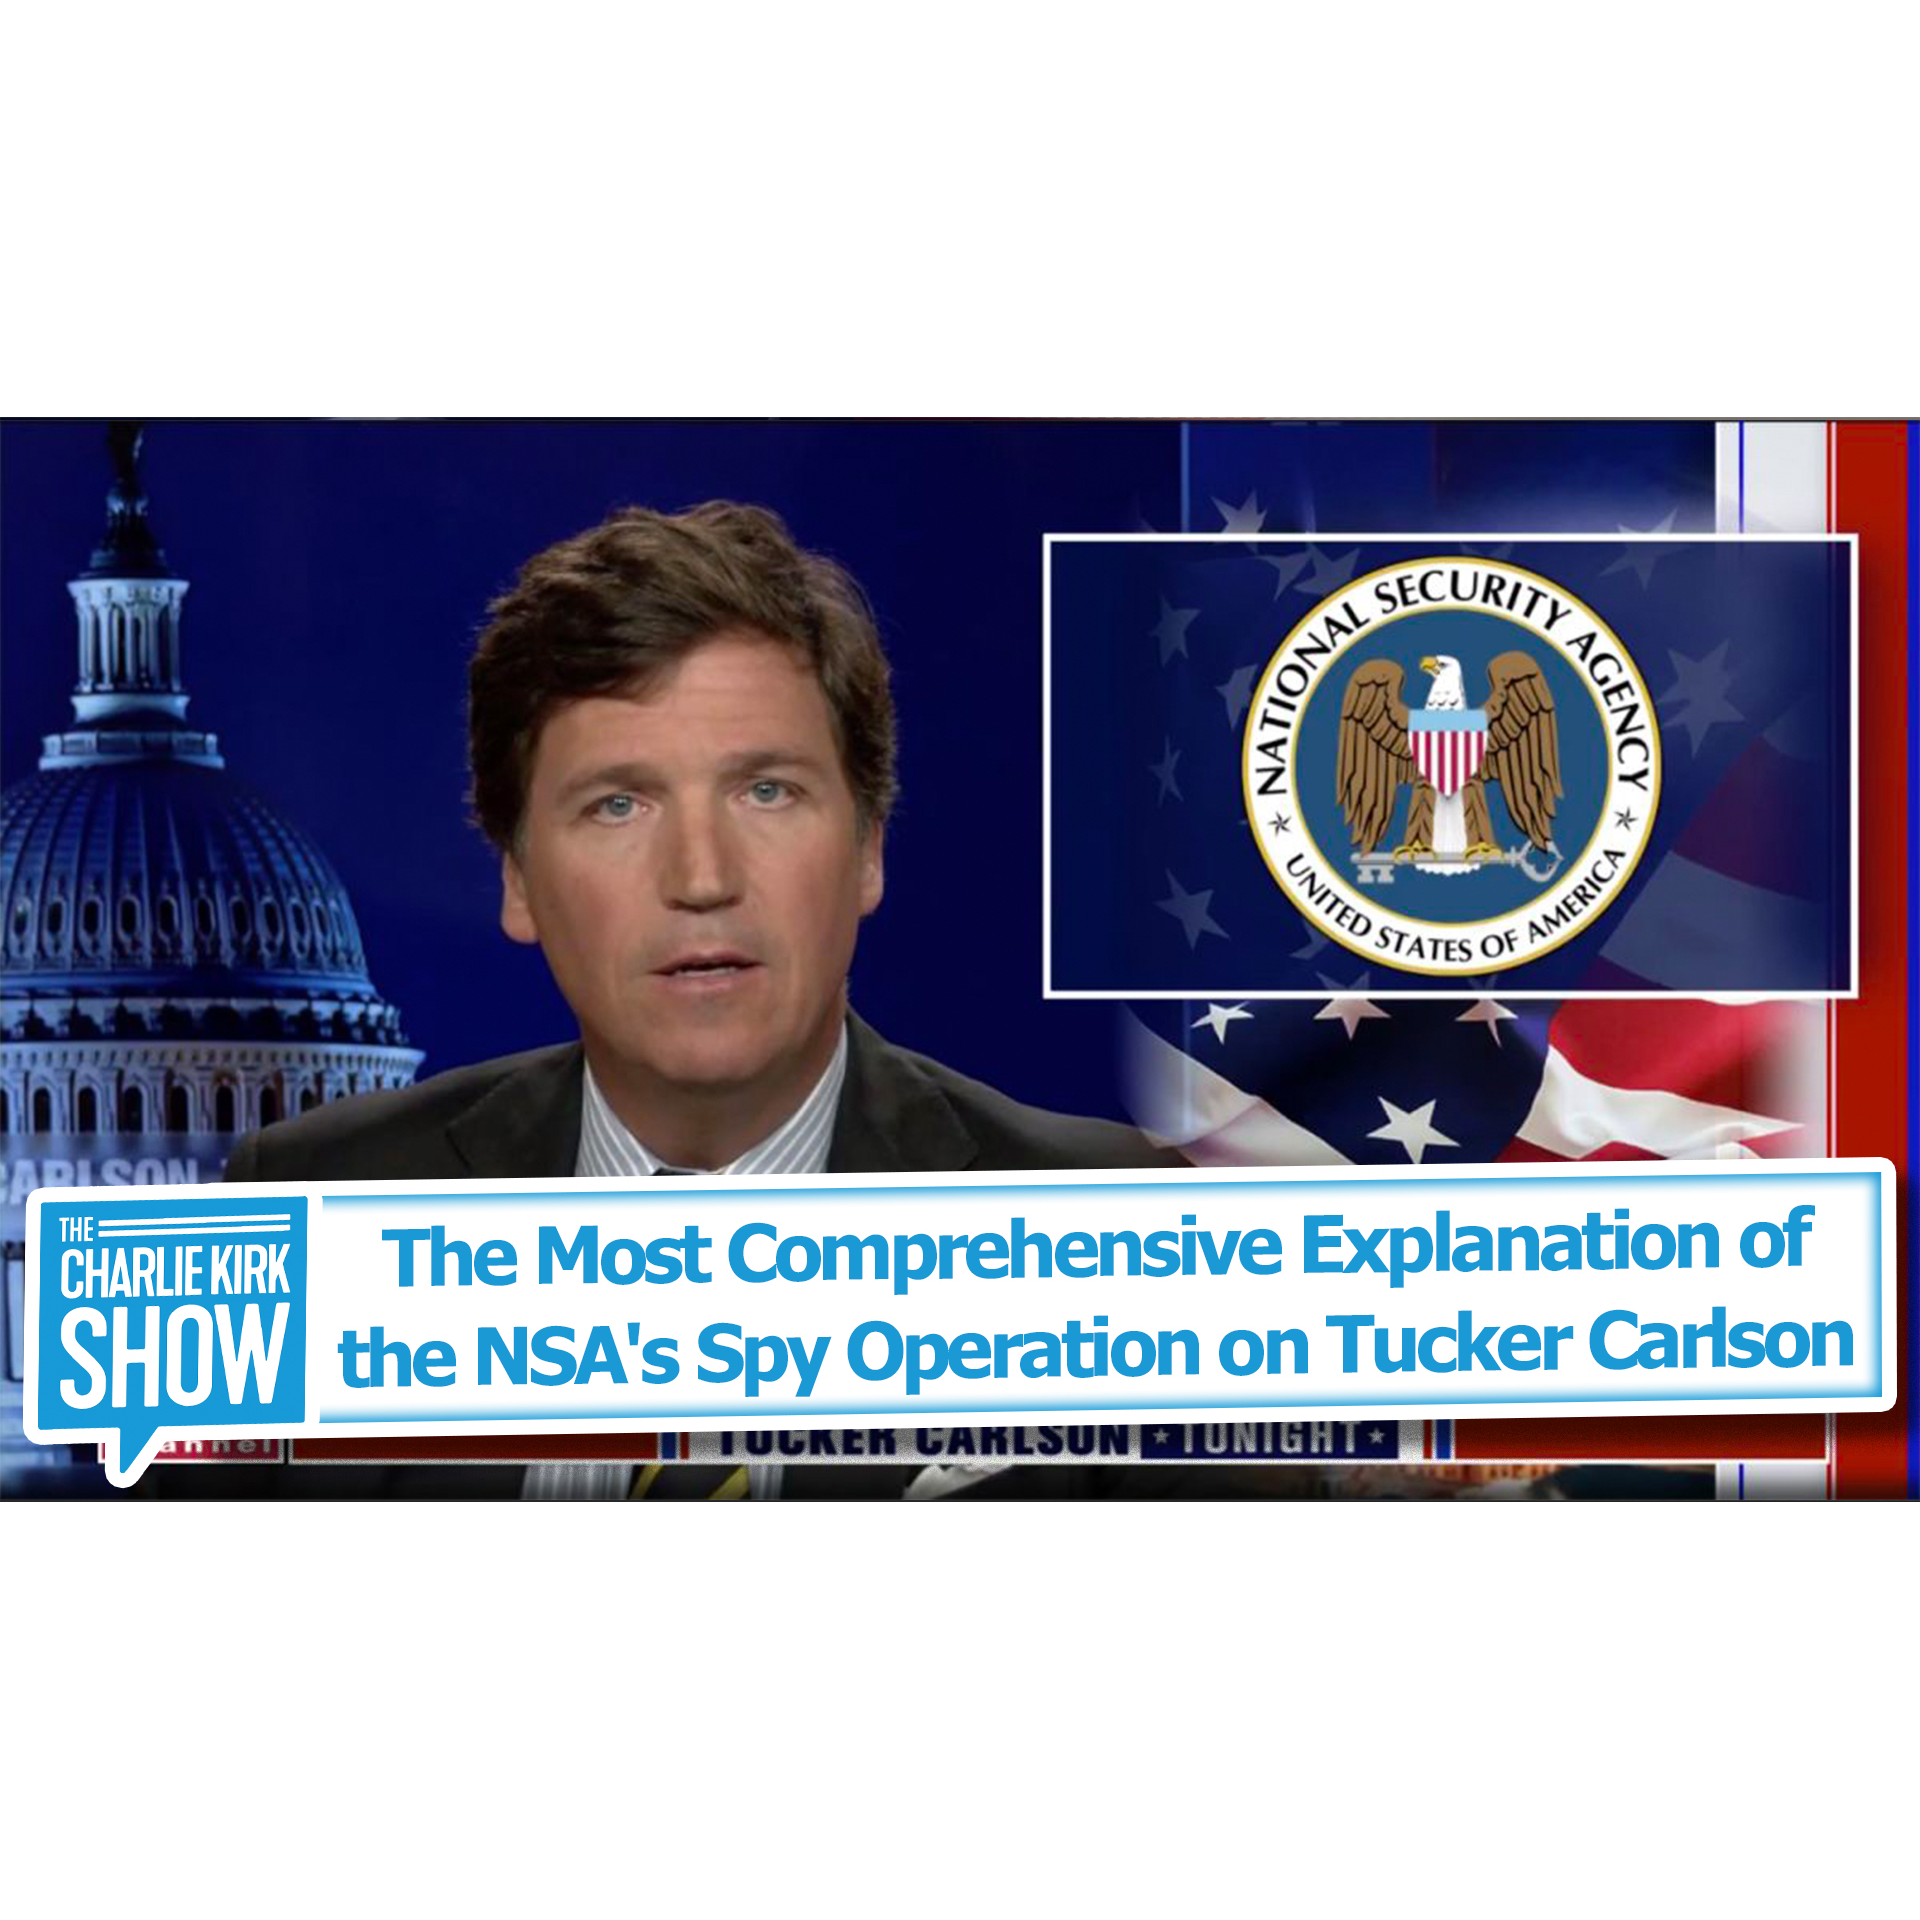 The Most Comprehensive Explanation of the NSA's Spy Operation on Tucker Carlson